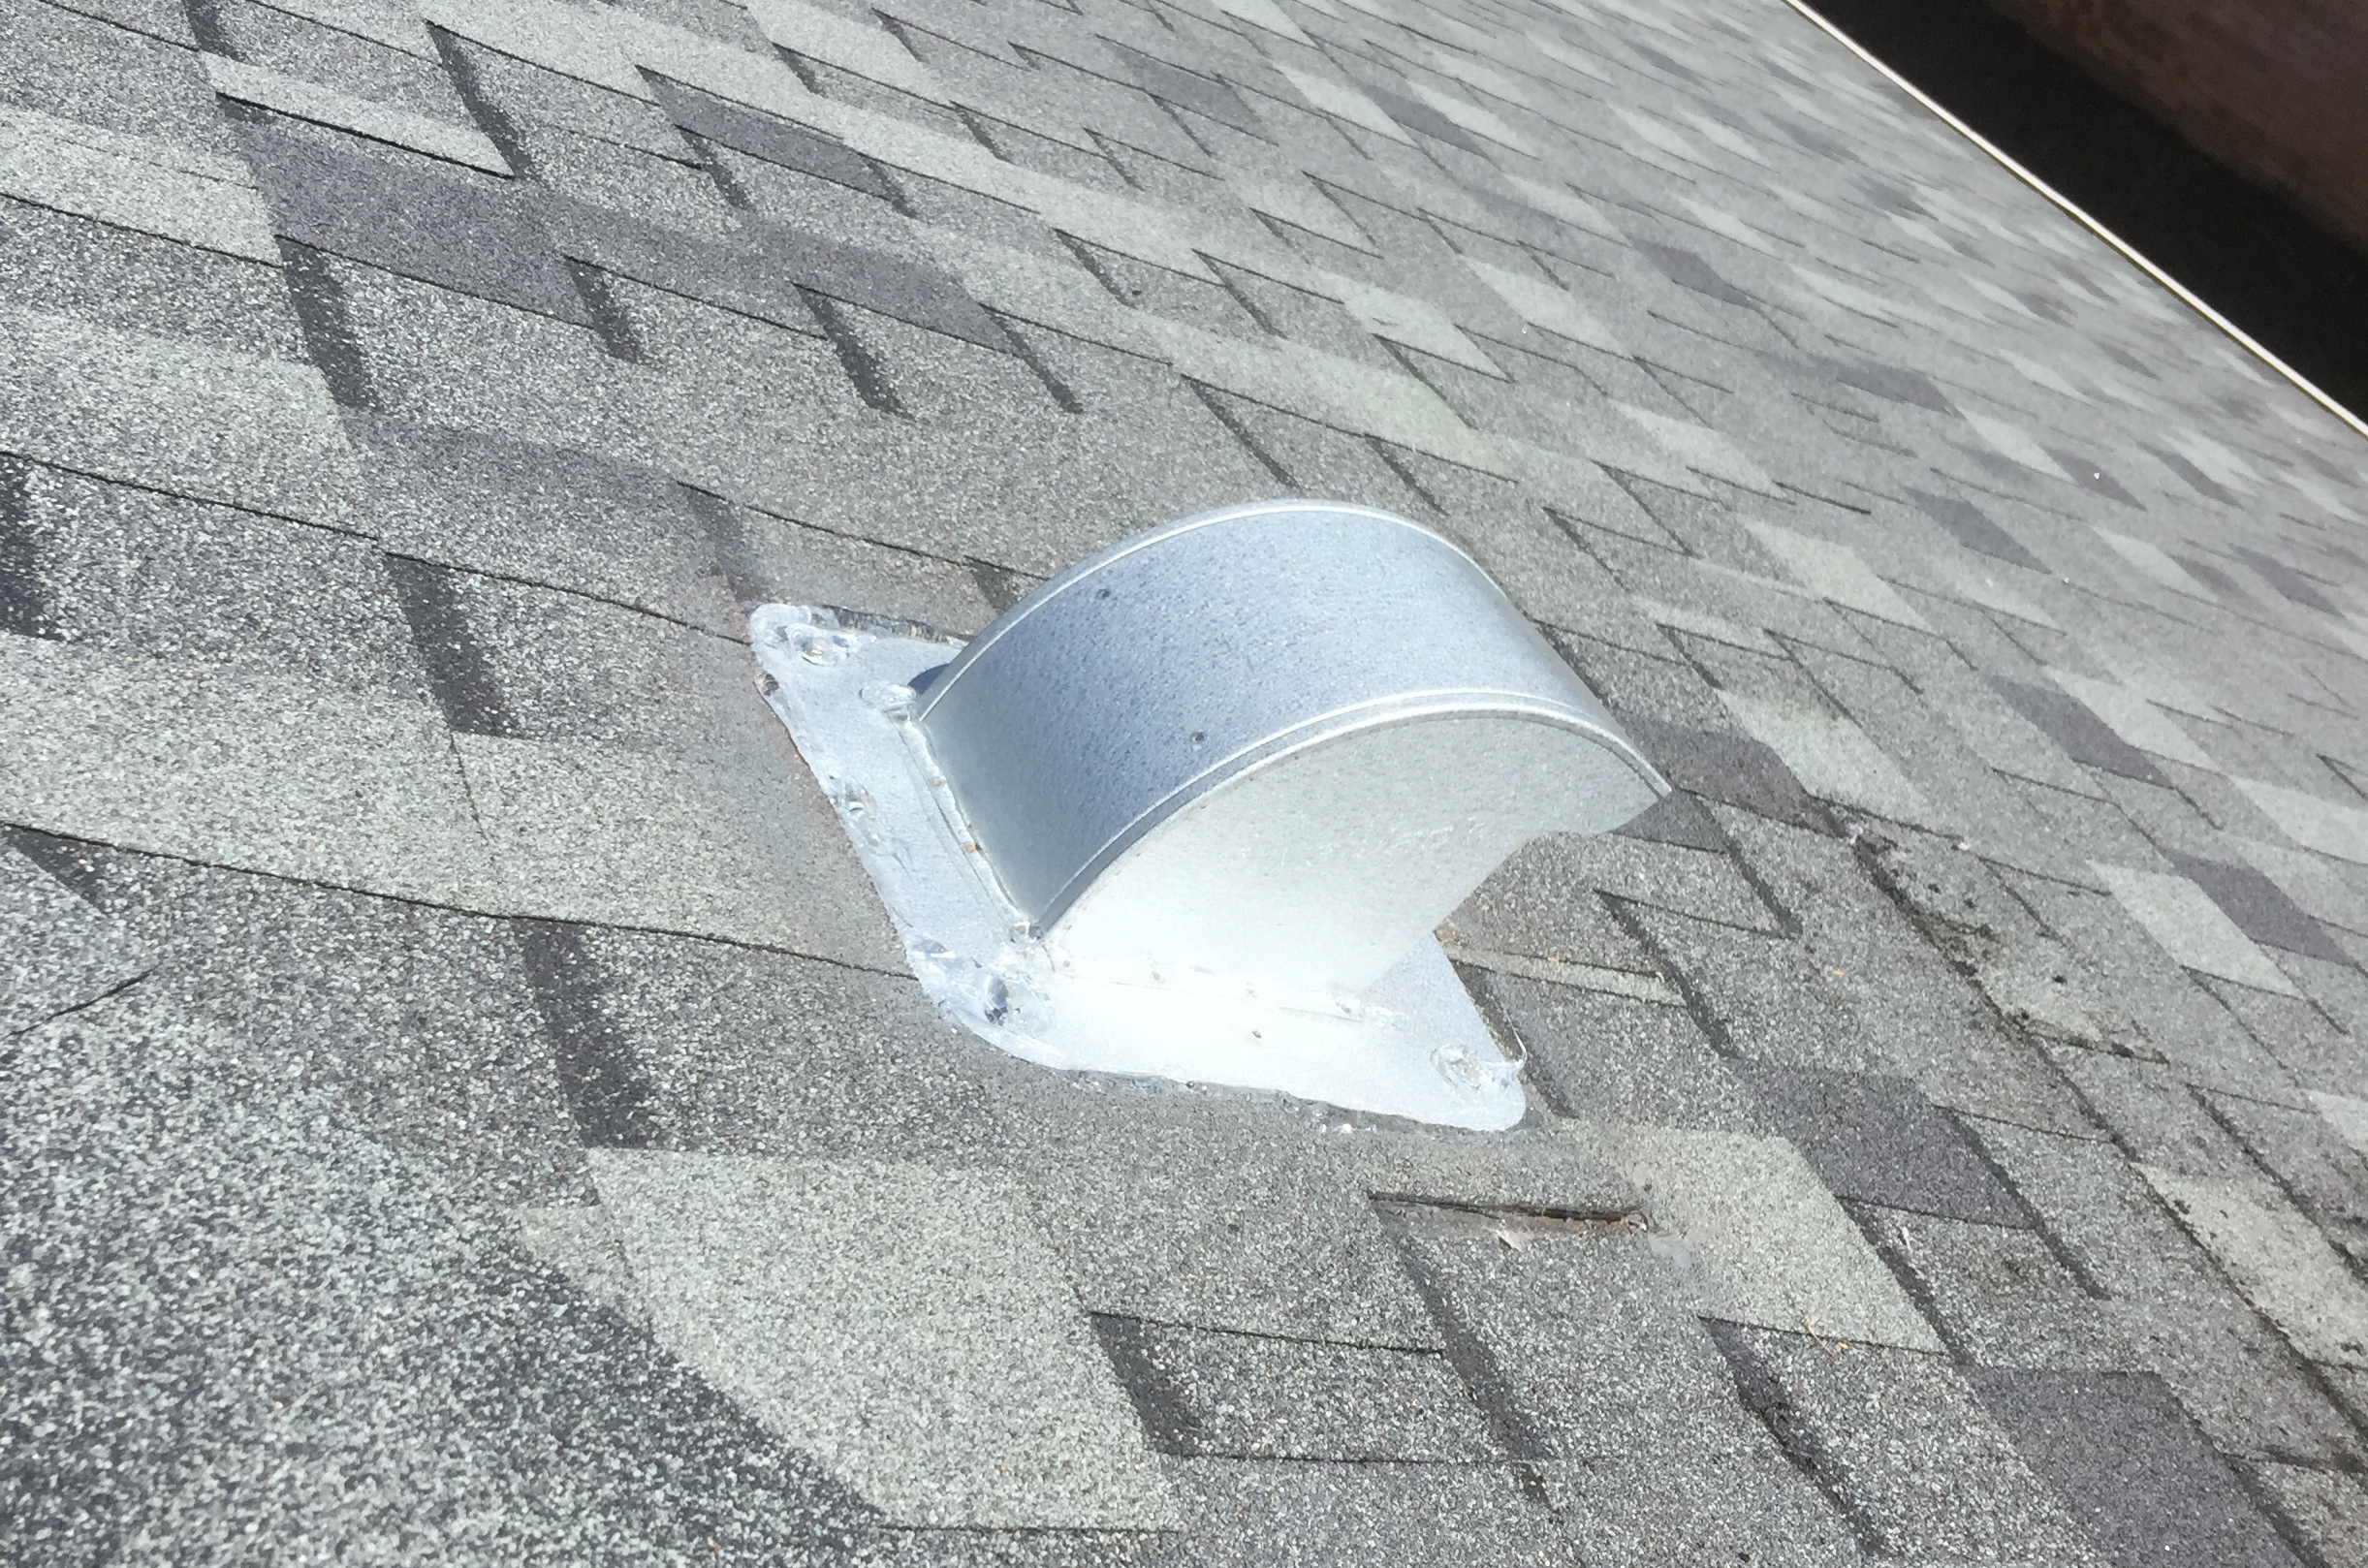 Dryer vent exhaust on the roof